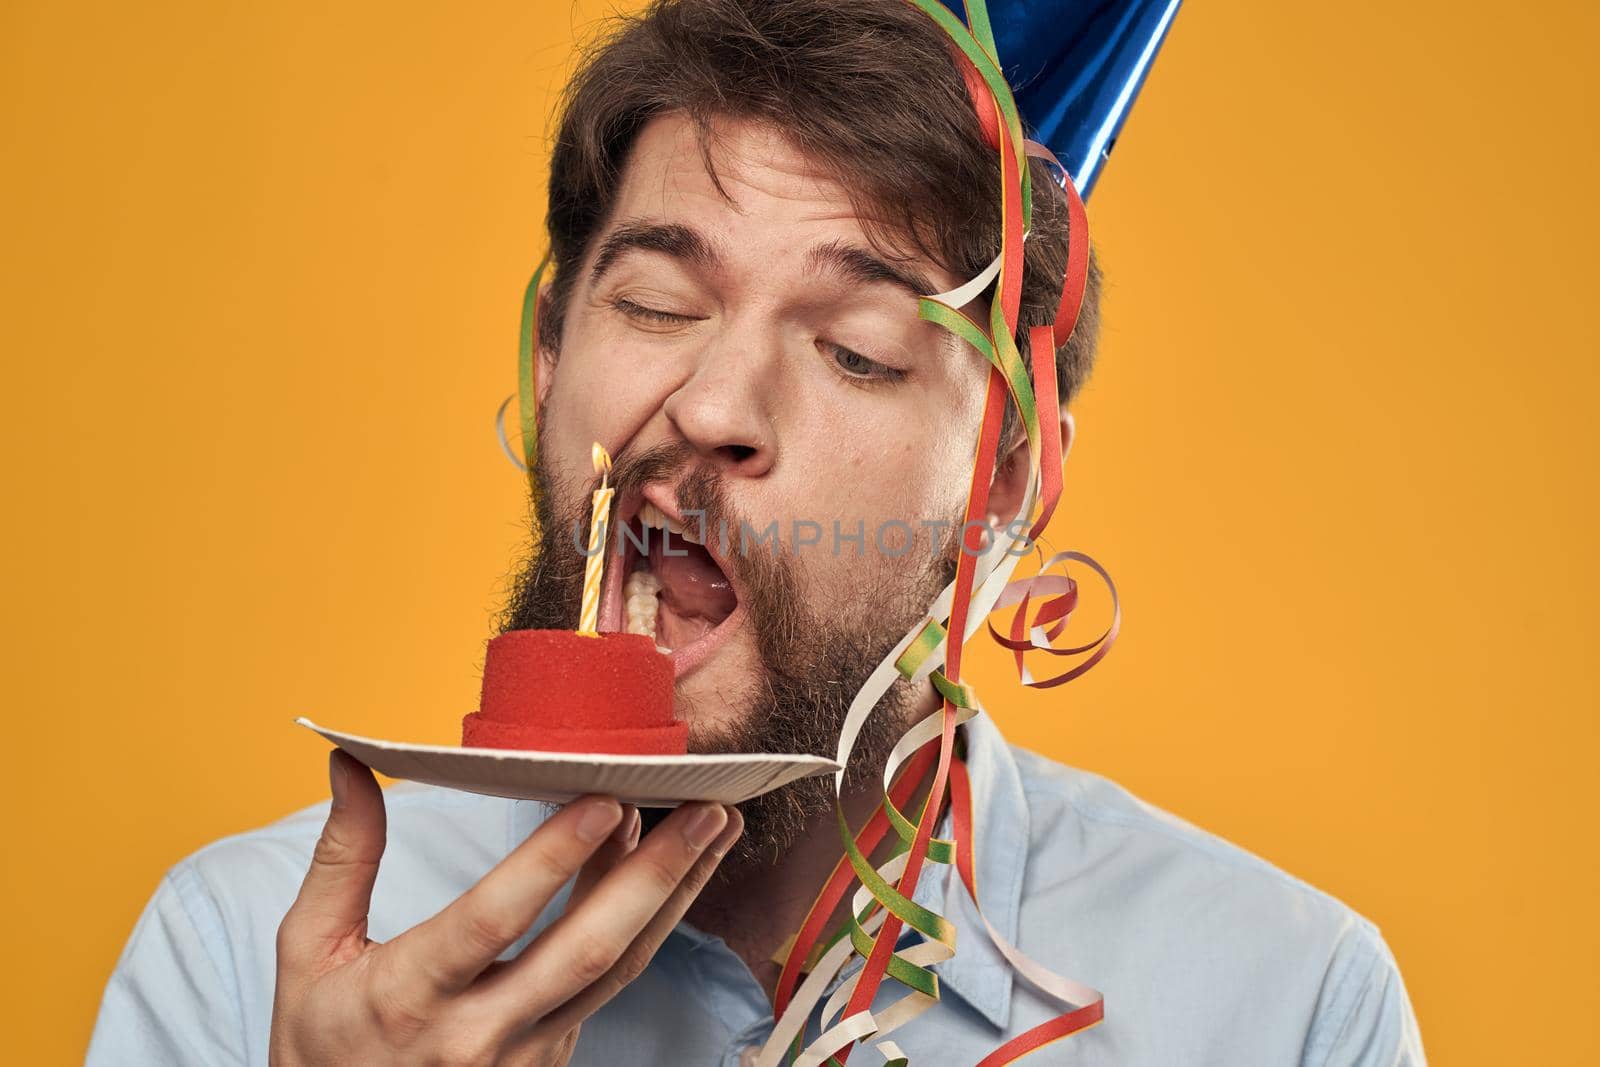 Birthday boy in a cap with a birthday cake in his hand and a candle. High quality photo